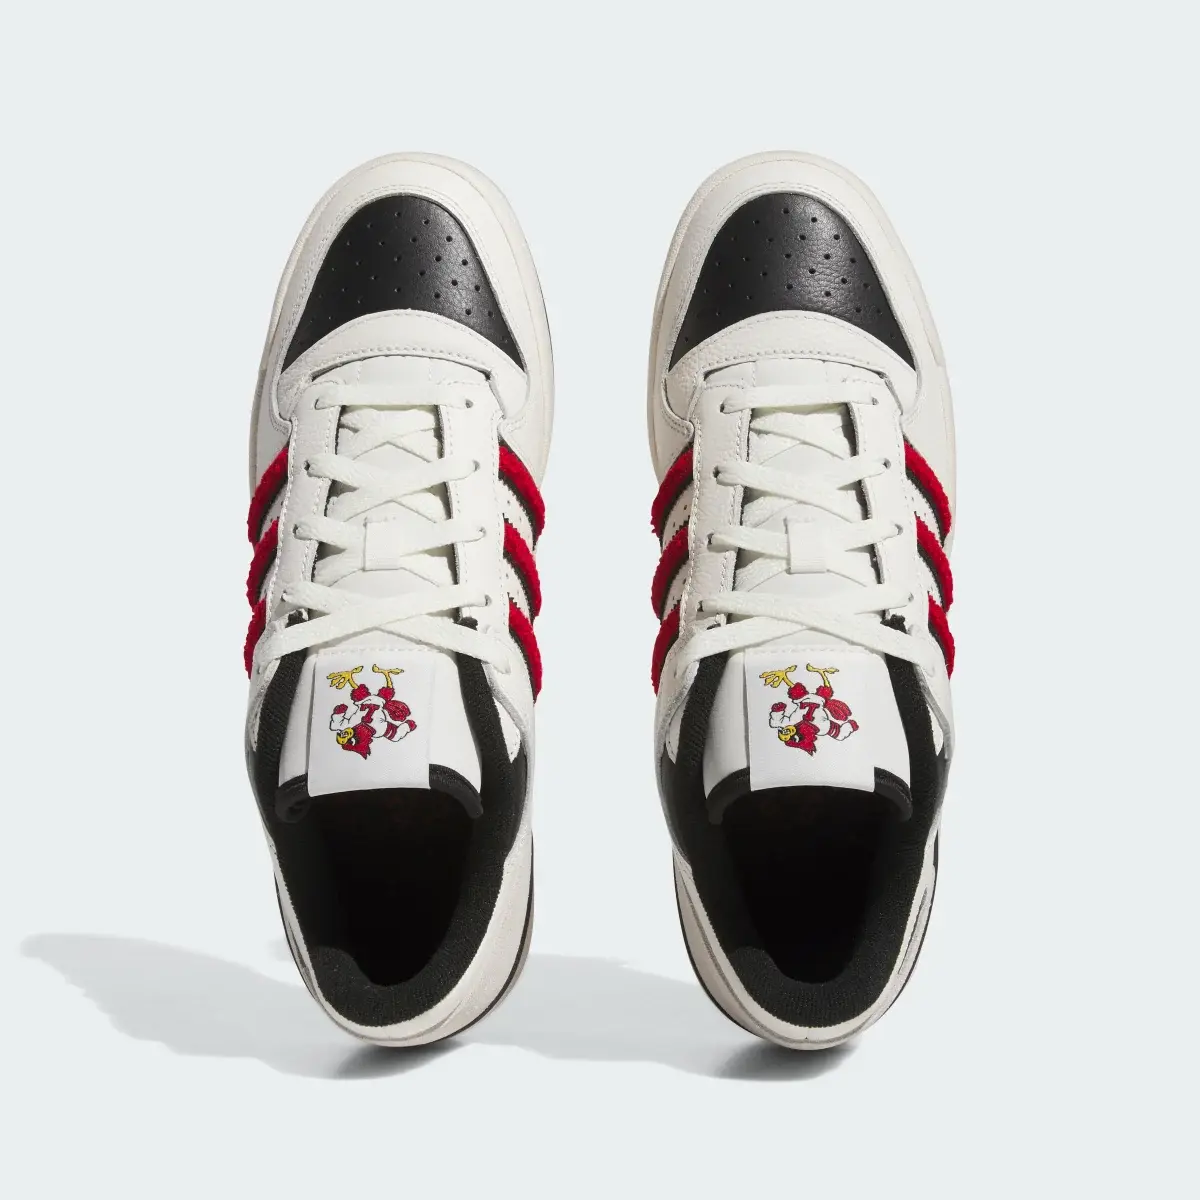 Adidas Louisville Forum Low Shoes. 3